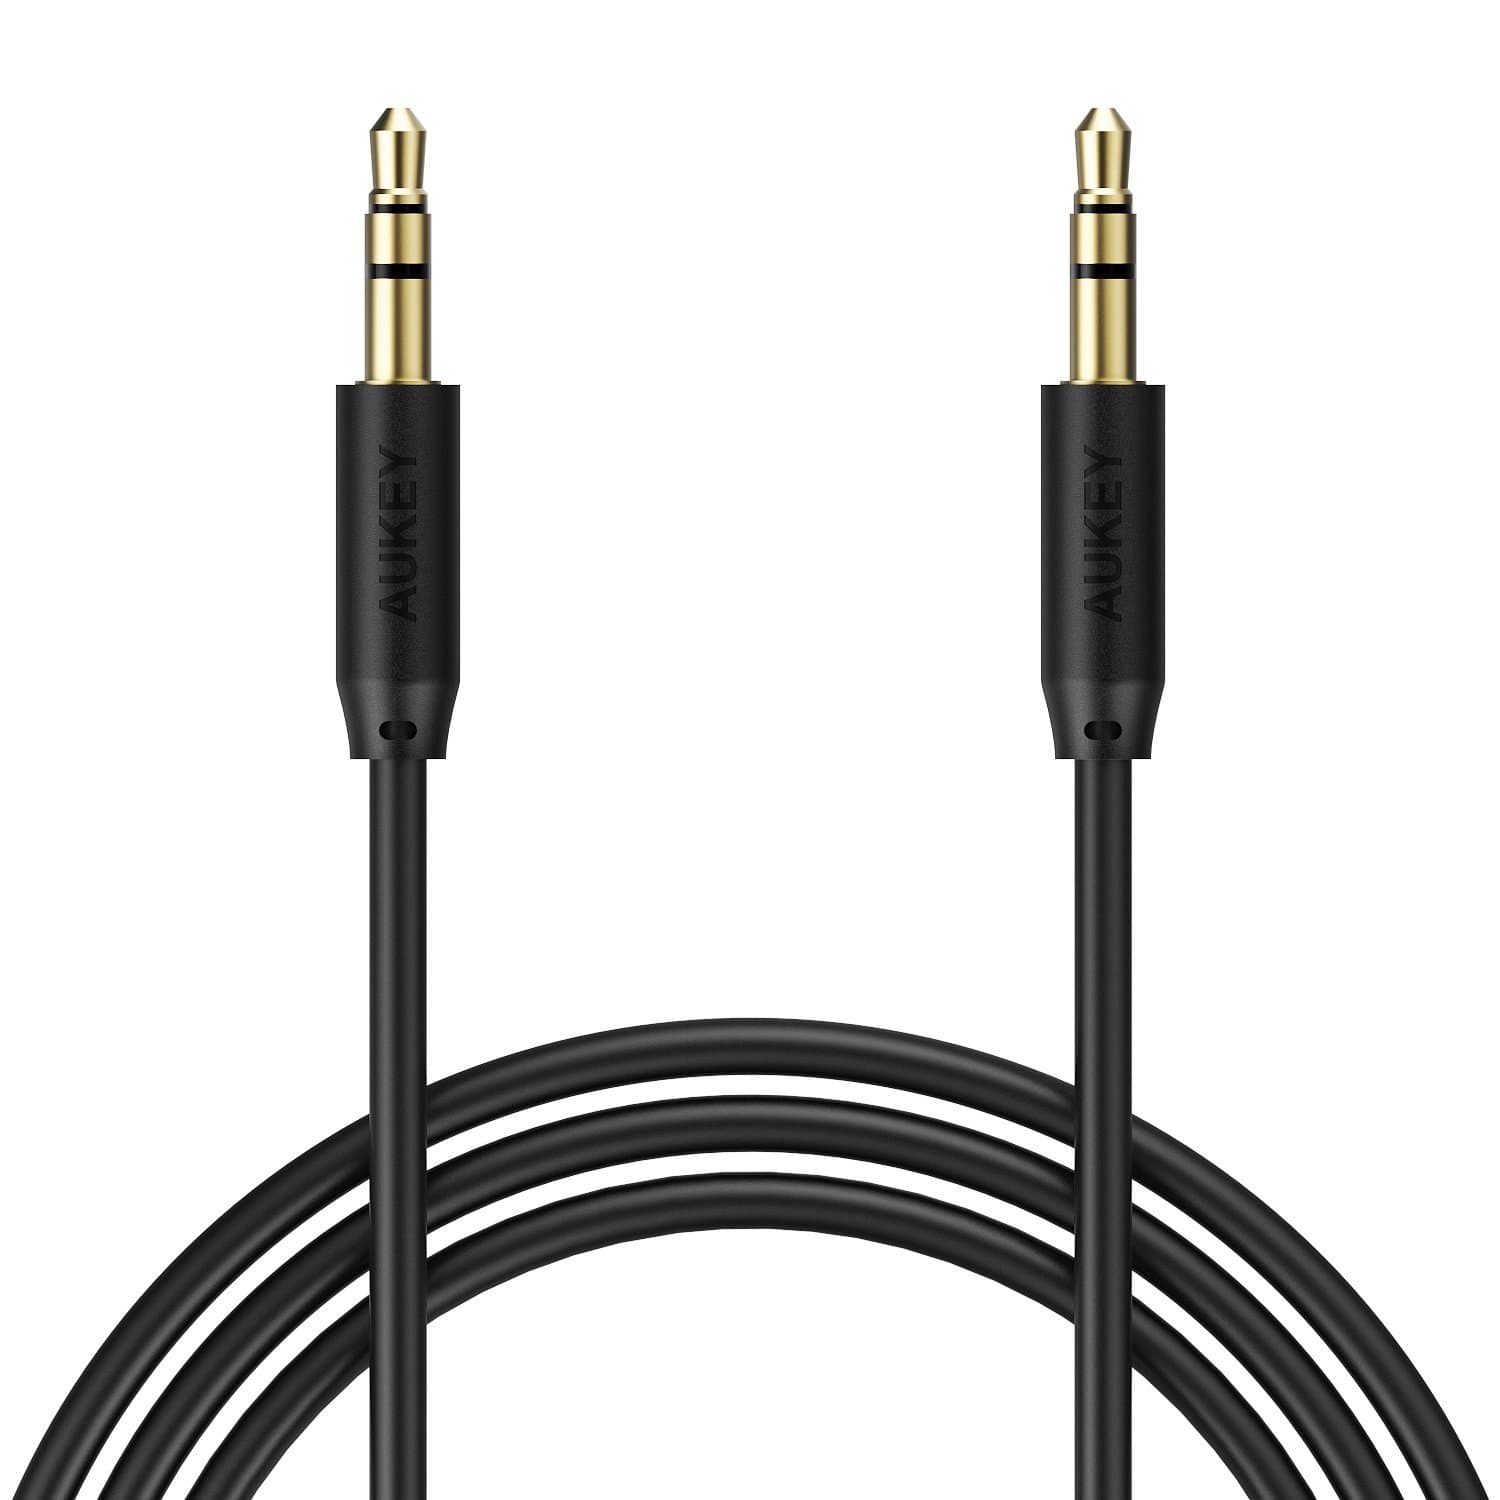 CB-V10 Premium 3.5mm Audio Gold Plated AUX Cable 1.2 METER